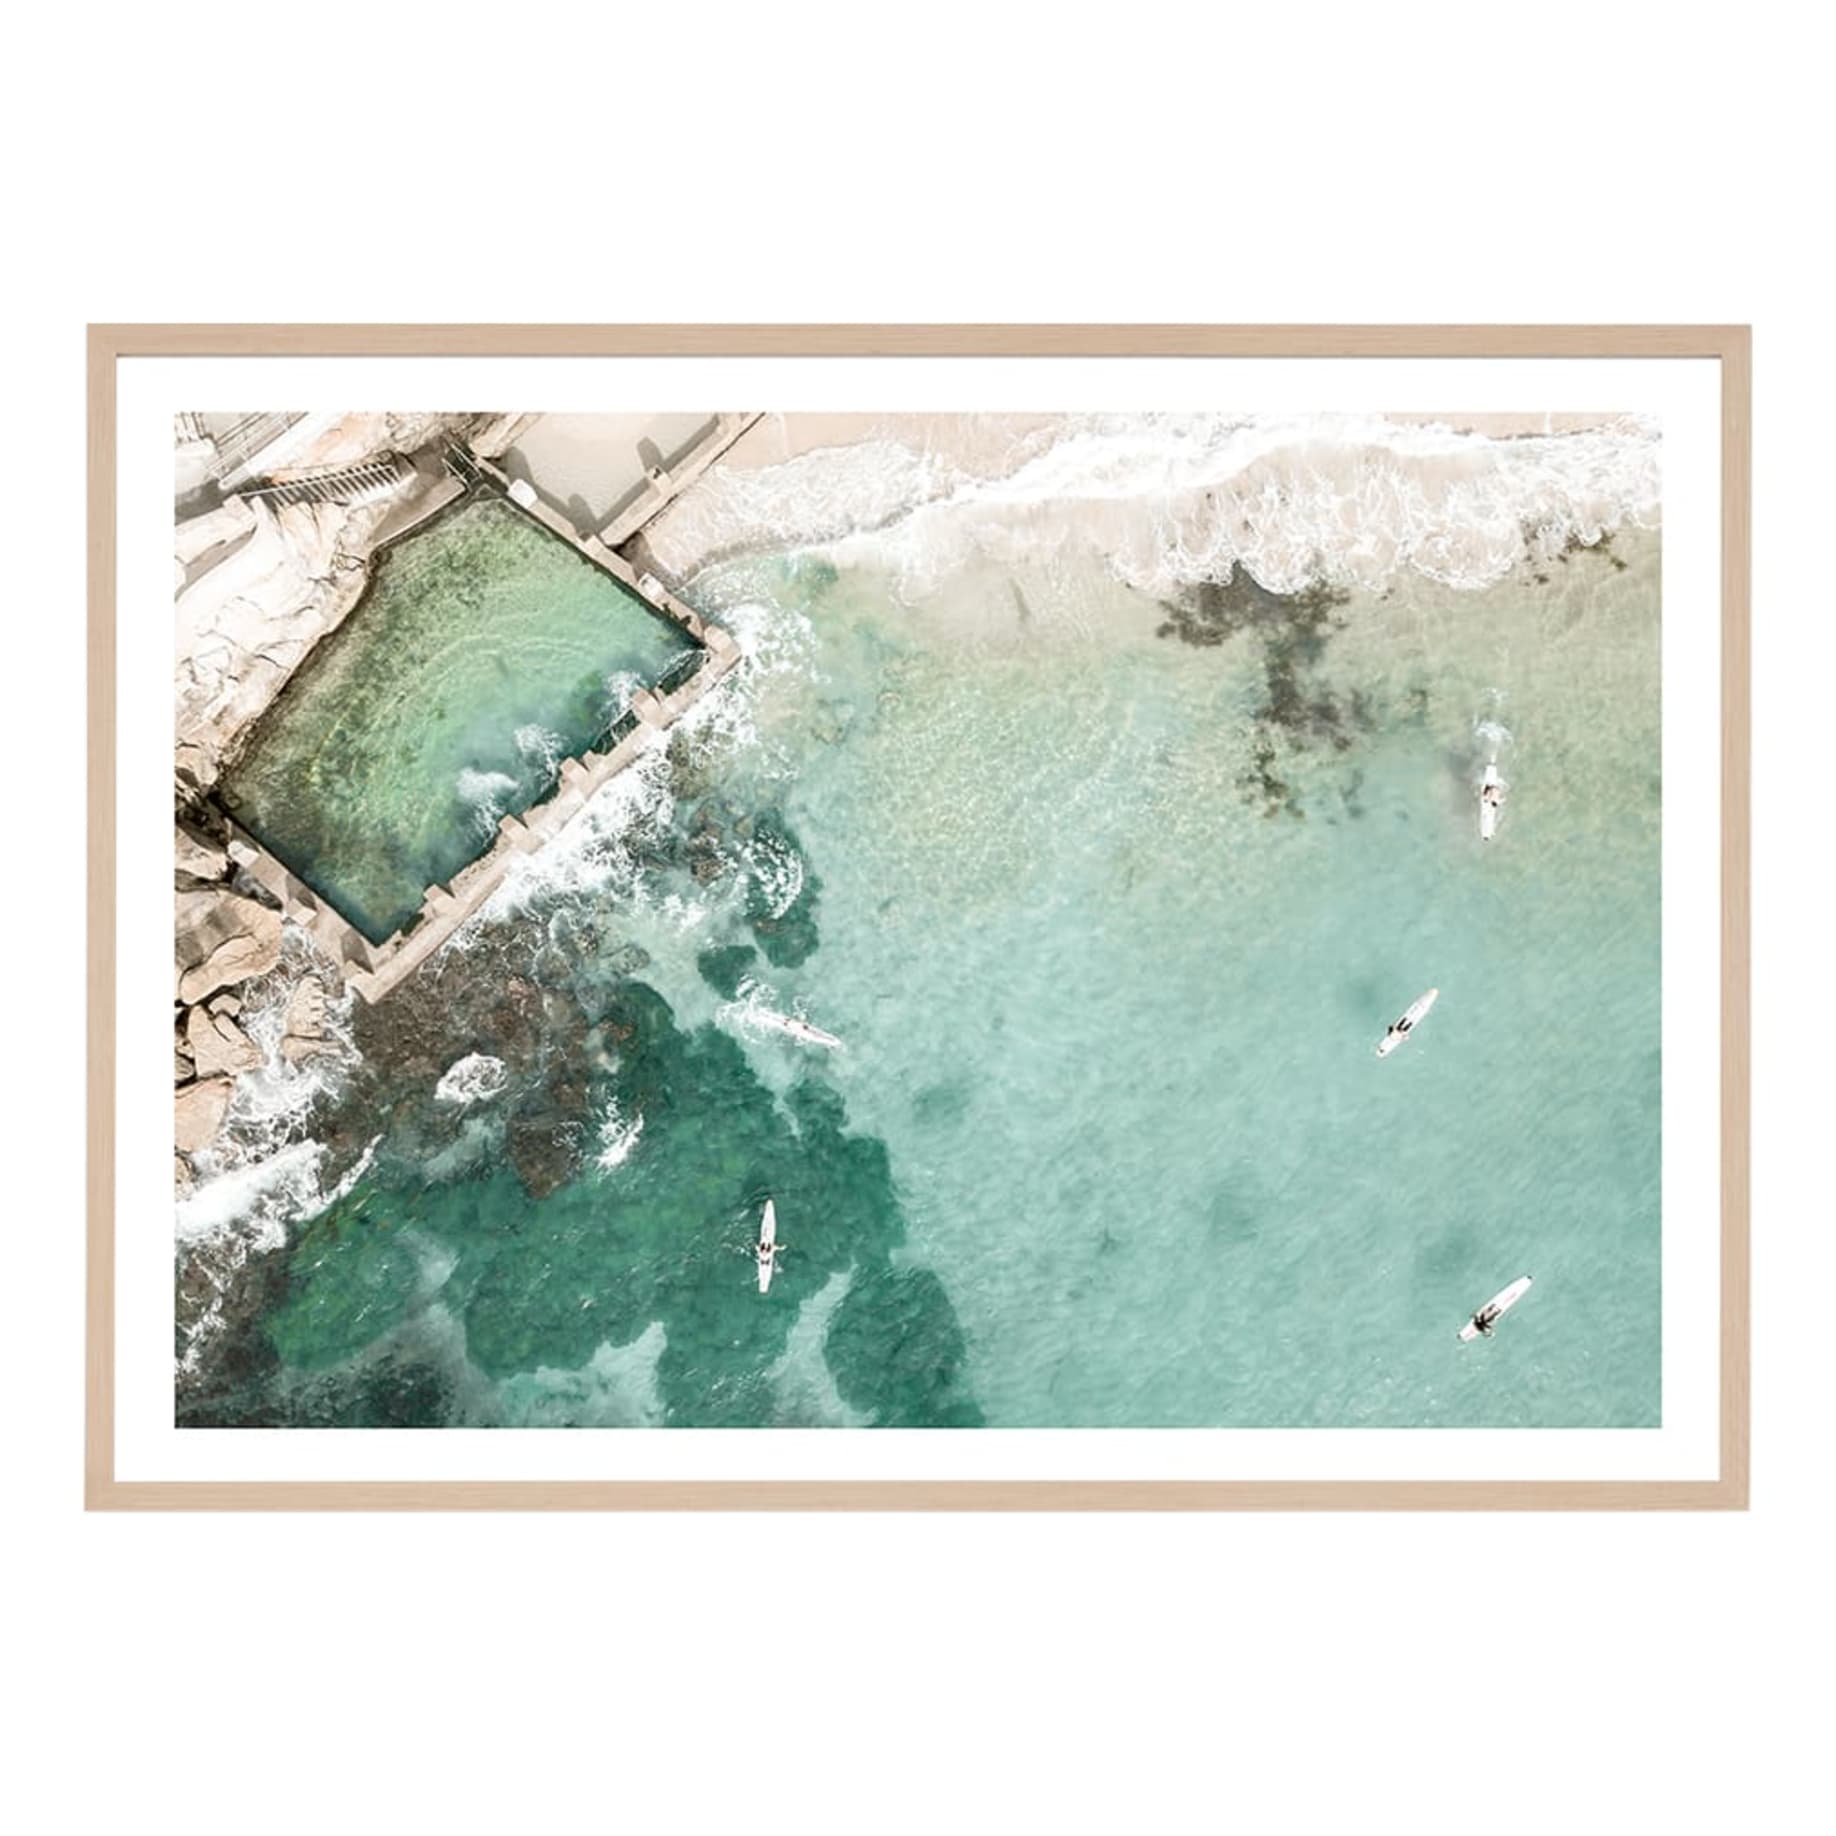 Coogee Paddle Framed Print in 62 x 45cm